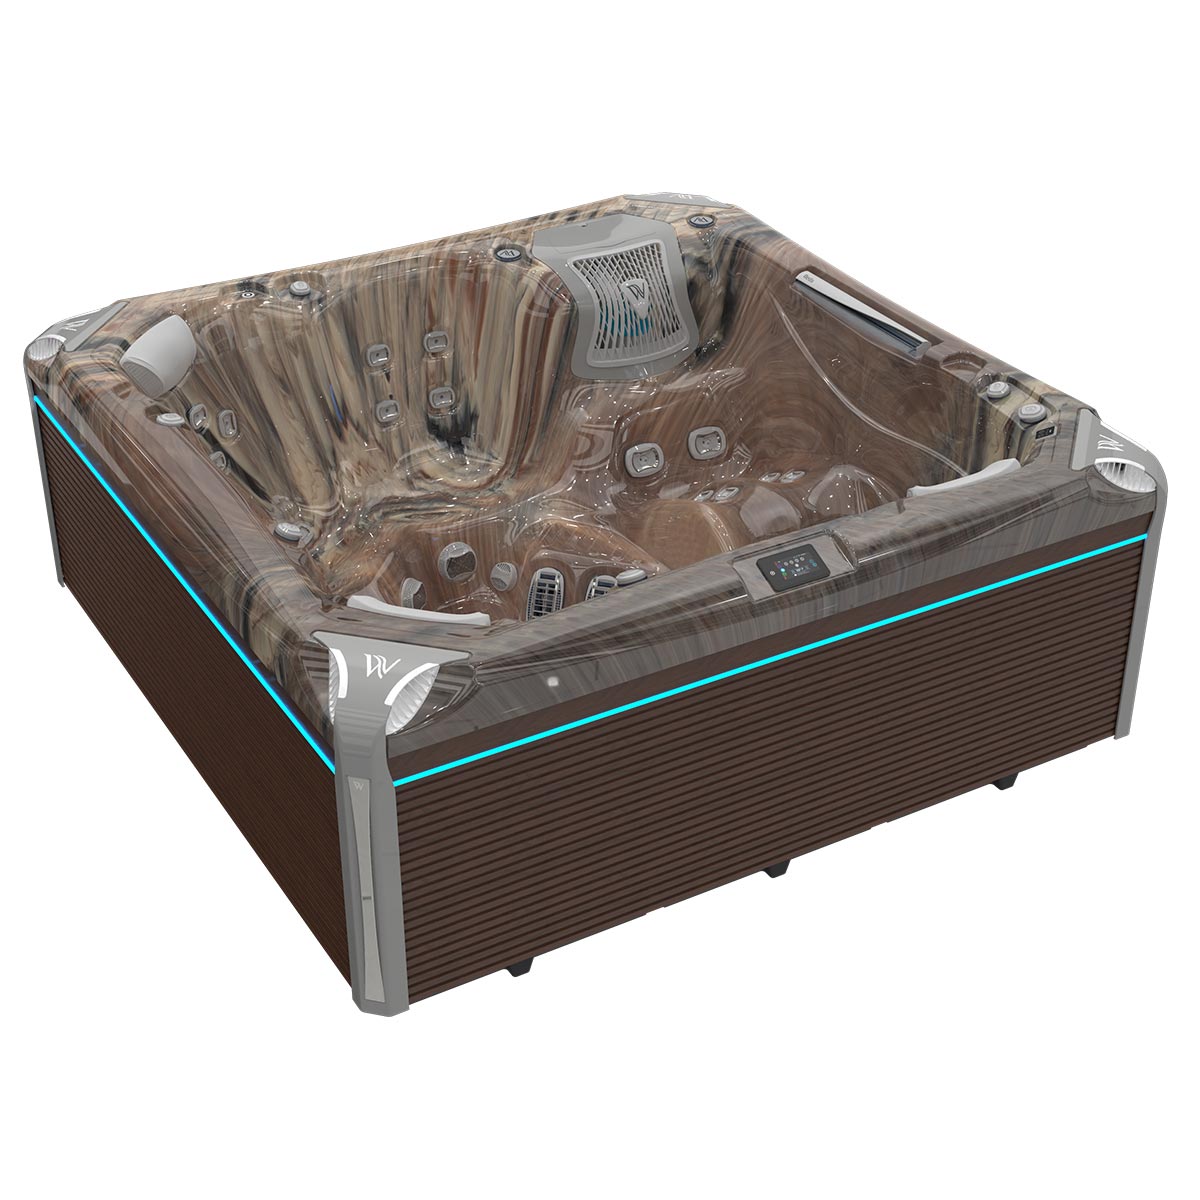 Kilimanjaro Life hottub, tuscan sun spa, side view Whirlpool, deluxe edition